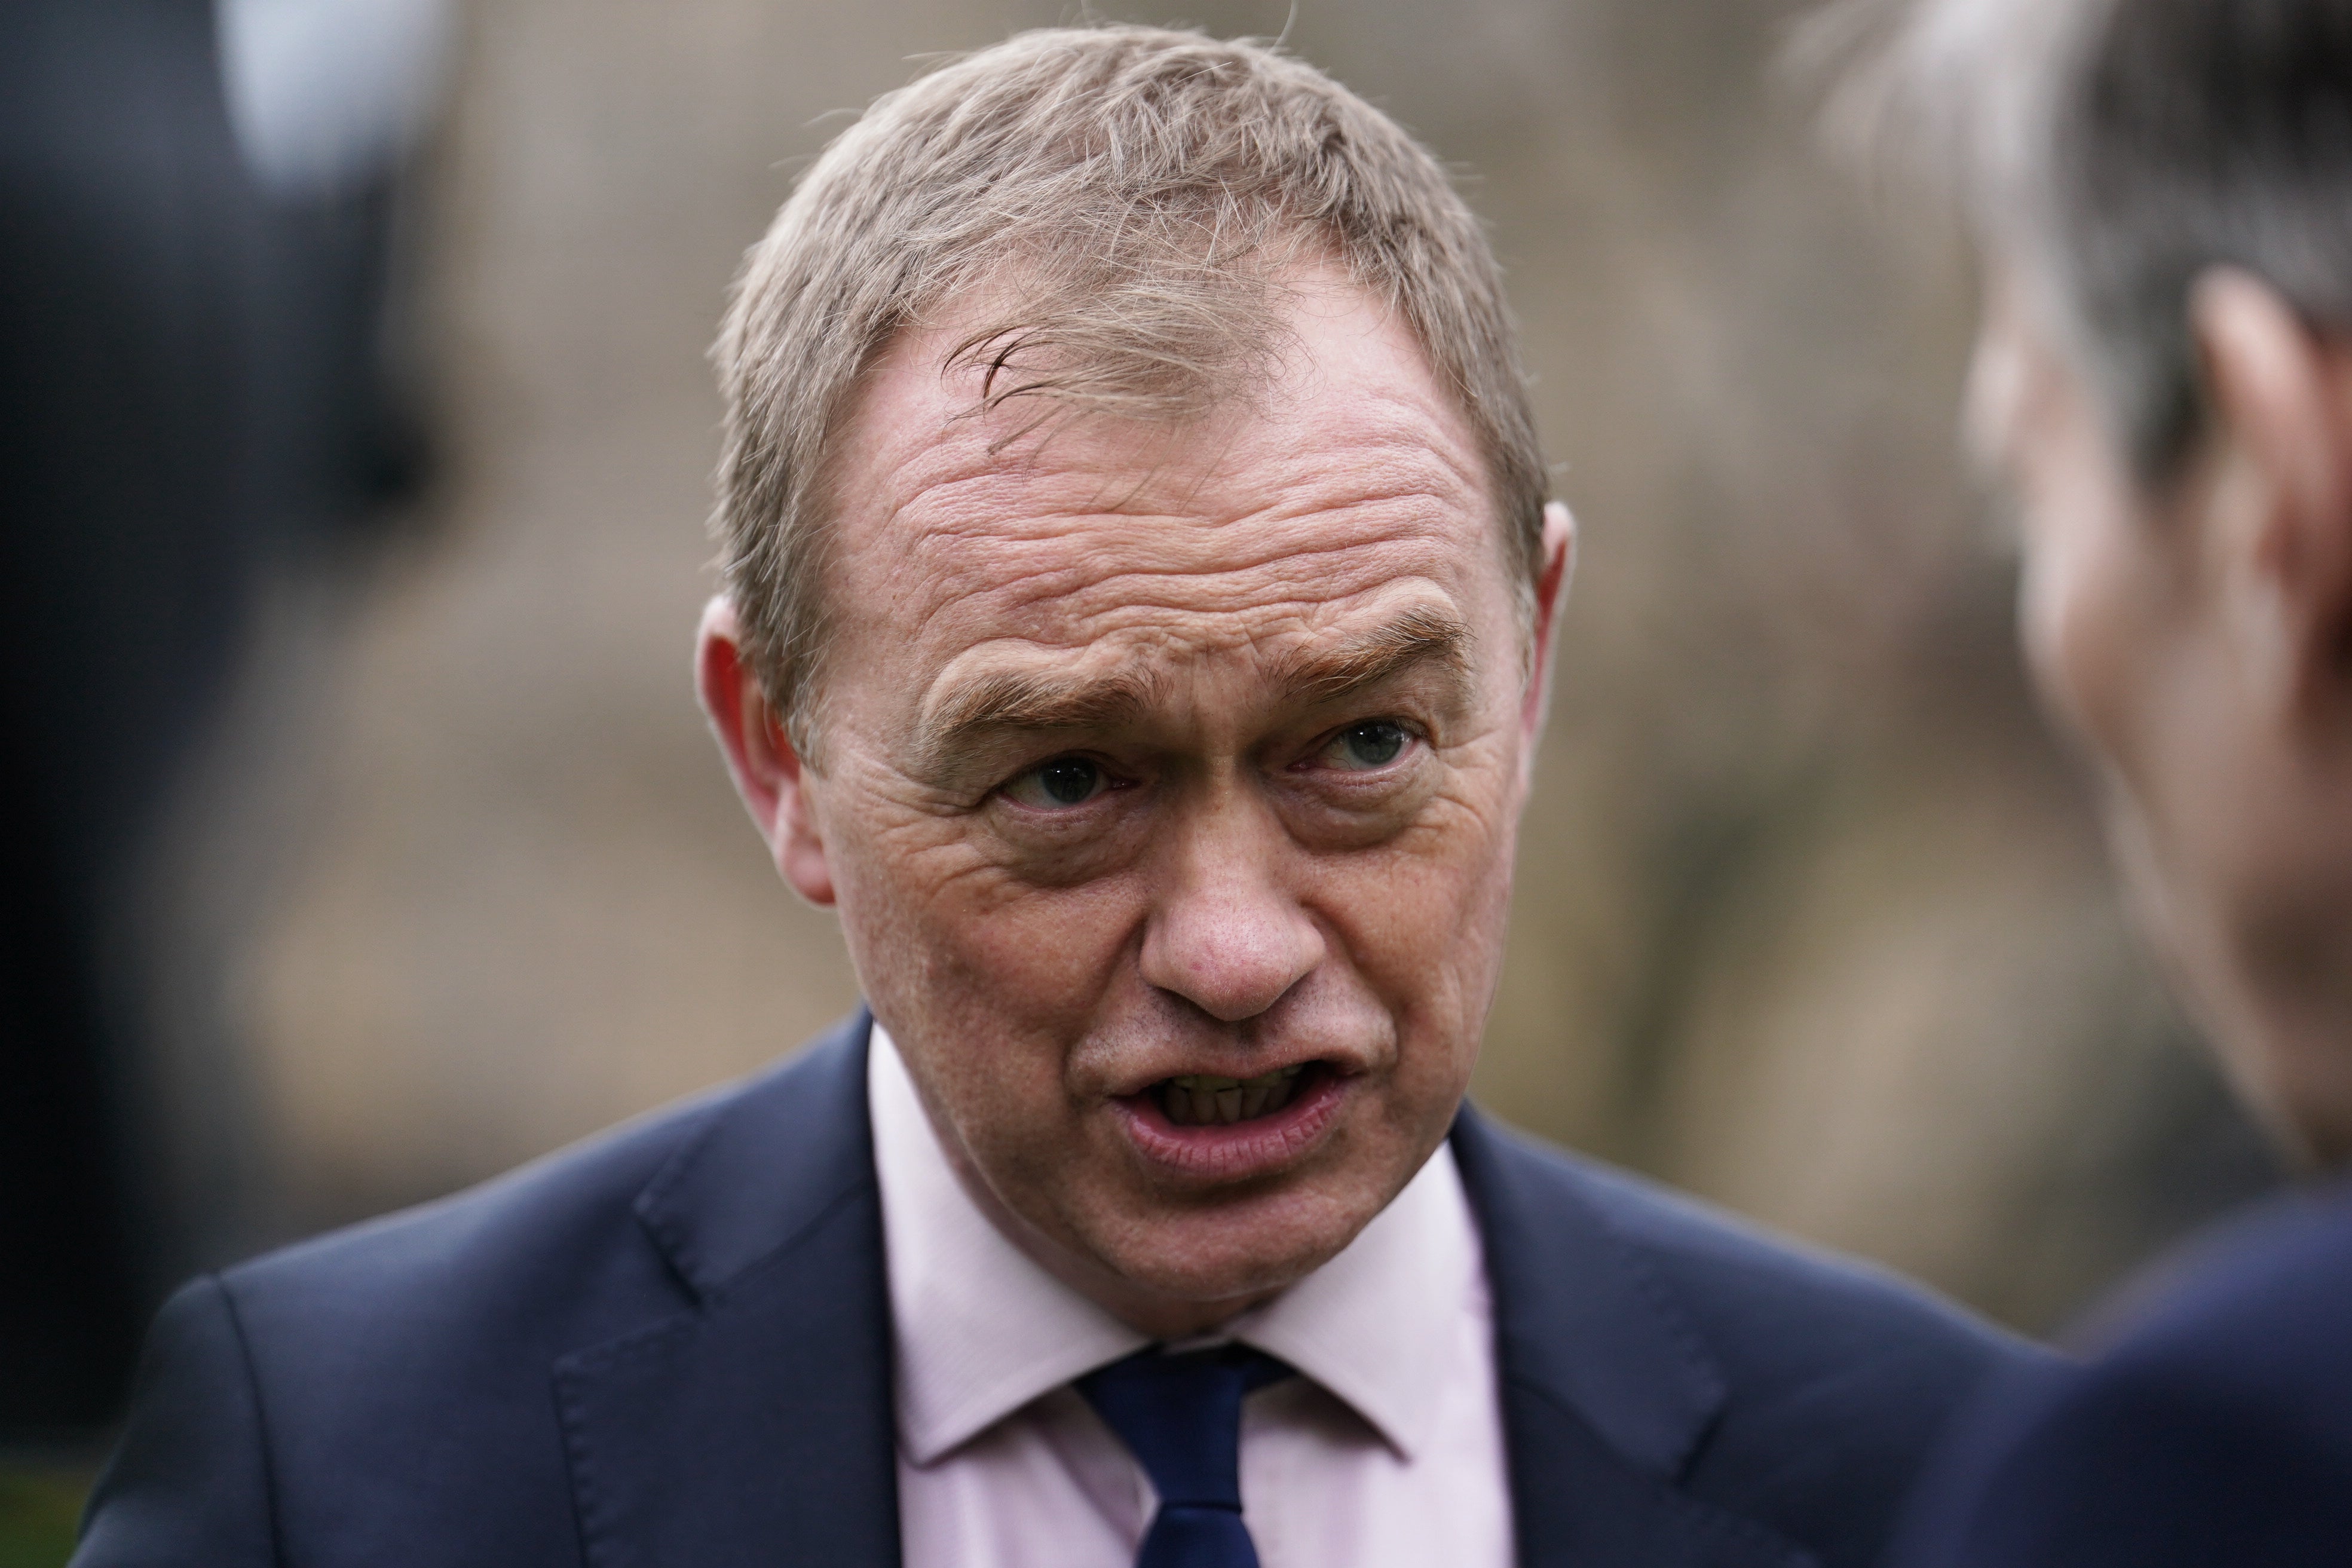 Tim Farron’s Christian faith was considered to be a fator in why he was forced to resign as leader